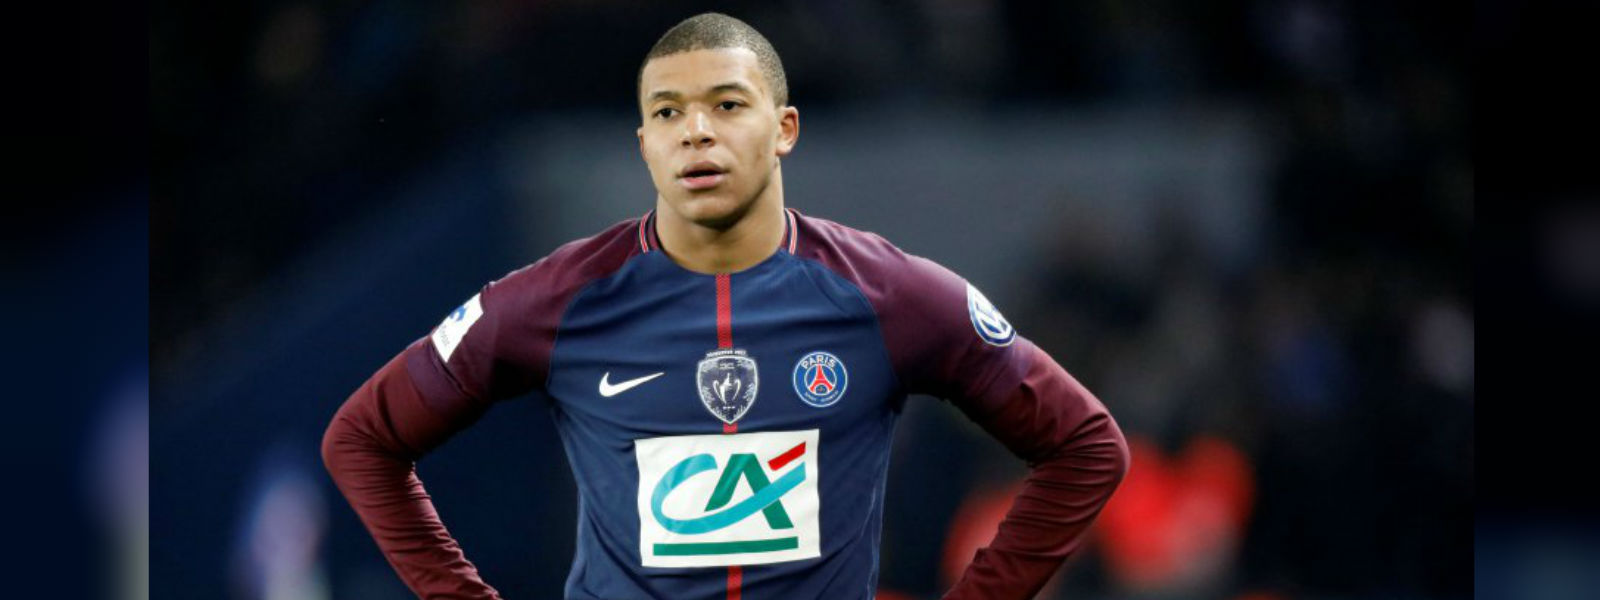 Mbappe joins the chase for Best FIFA Player award